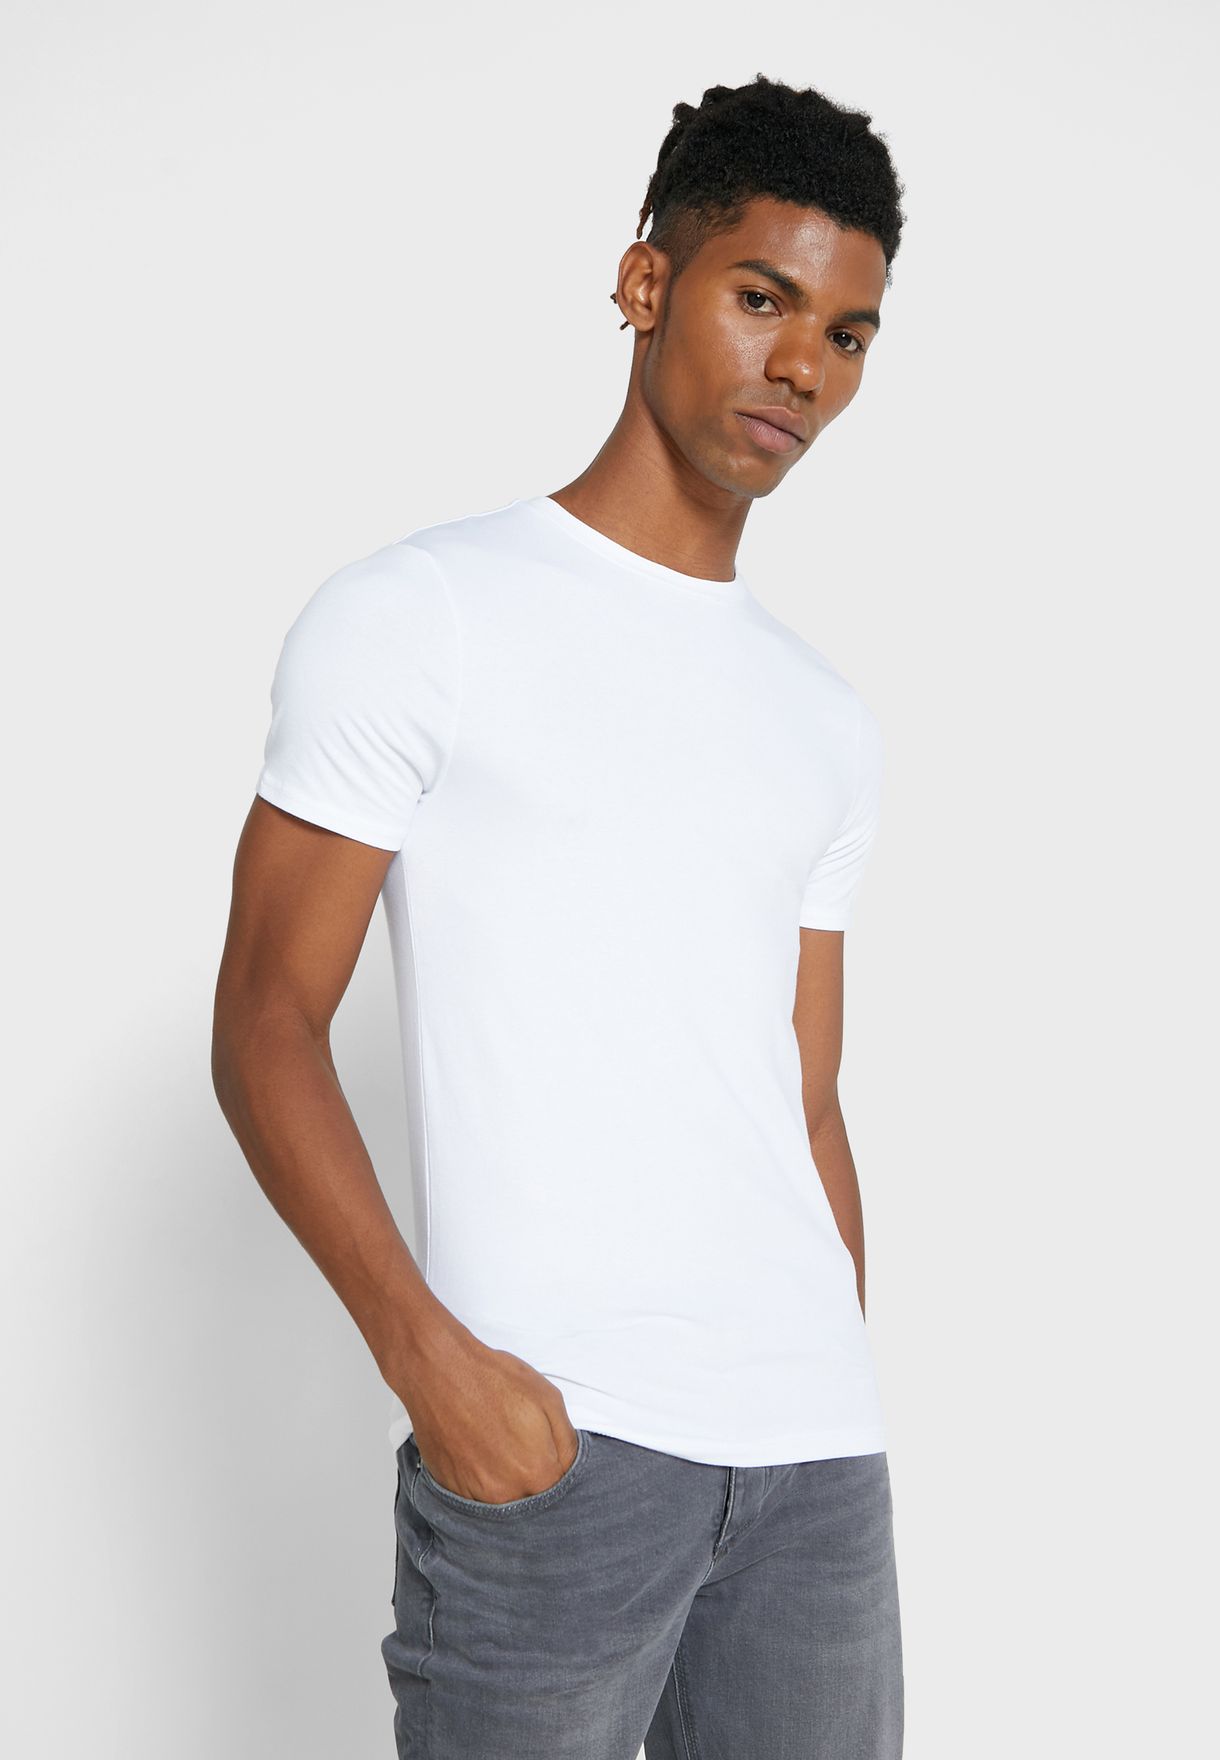 mens white muscle fit shirt